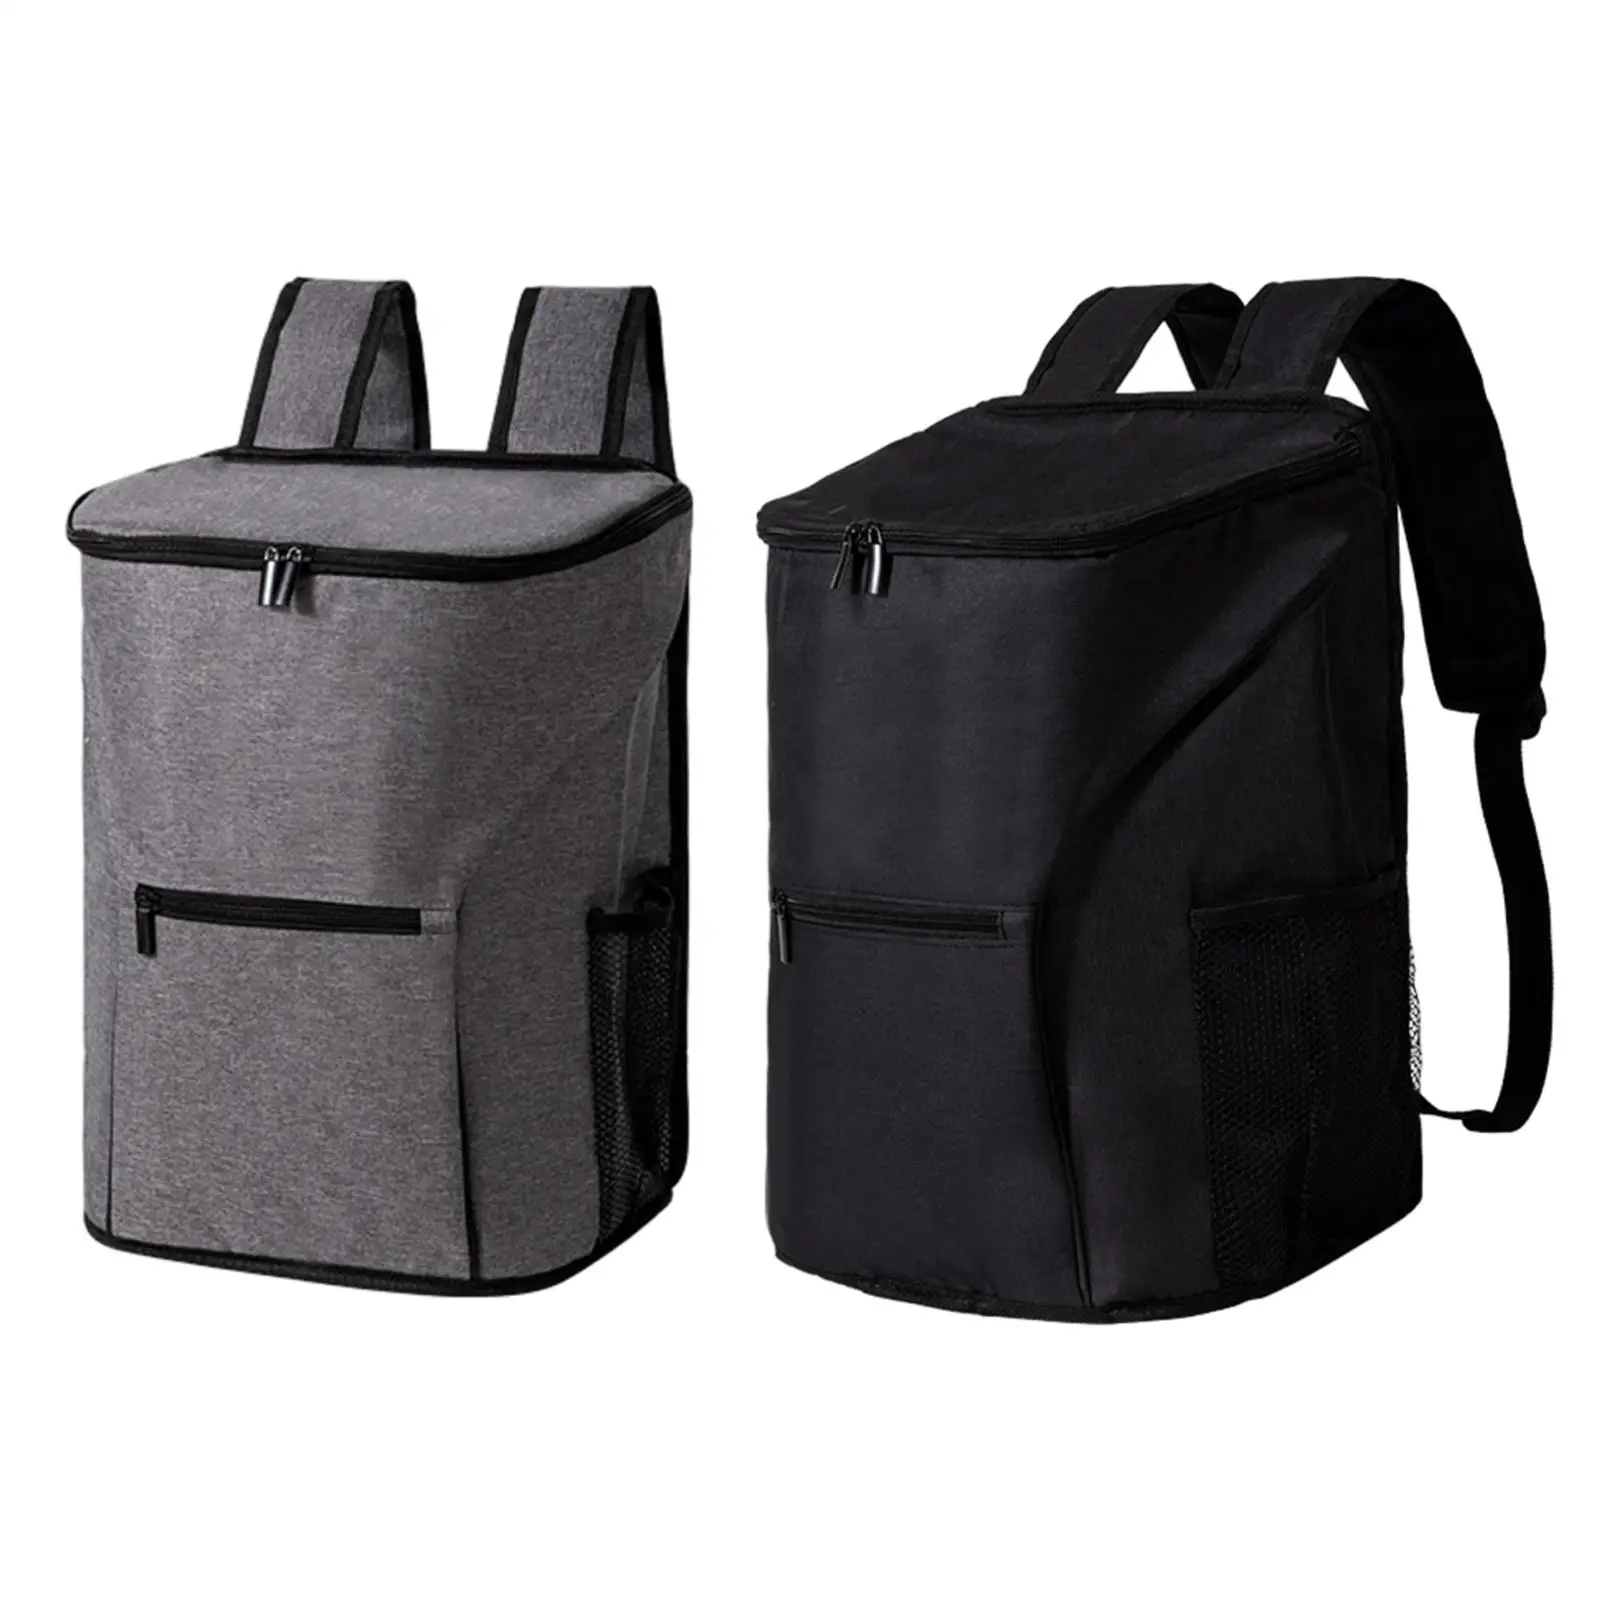 Insulated Backpack Portable Insulated Backpack Cooler Bag Waterproof Lunch Backpack for Work Outdoor Picnic Beach Camping